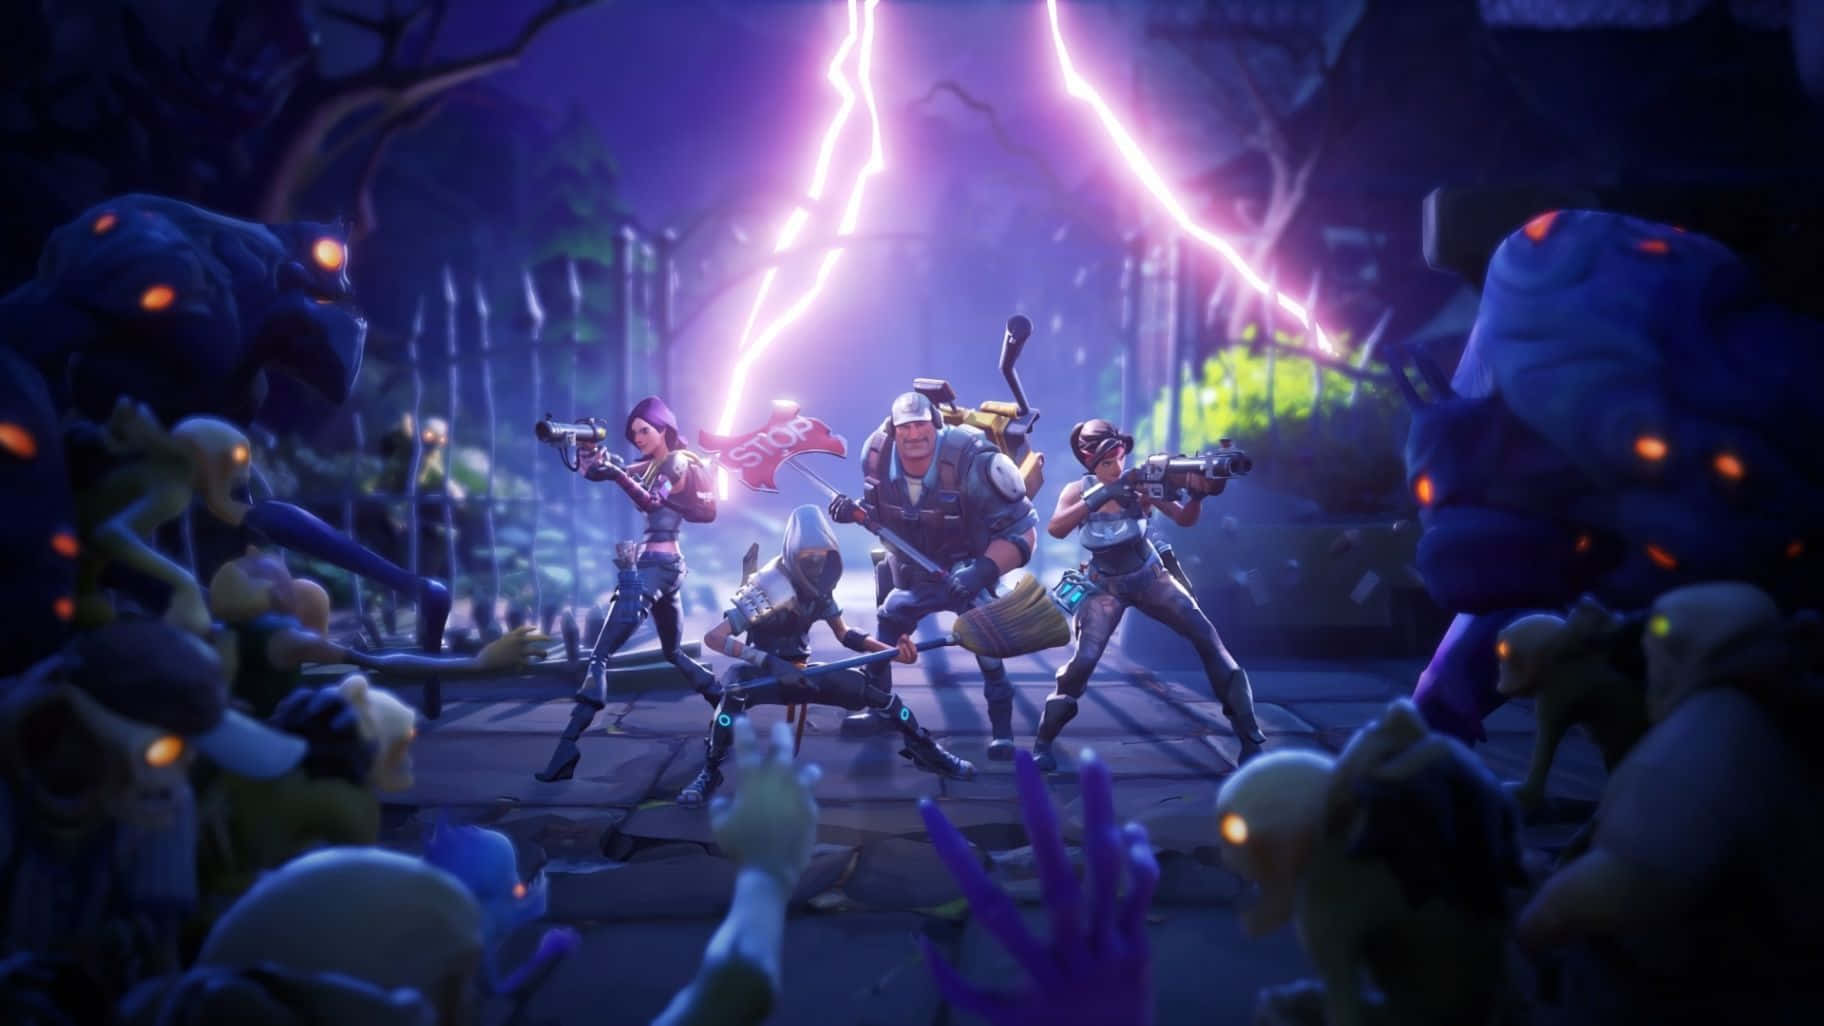 Fortnite - A Group Of Zombies In A Dark Room Wallpaper